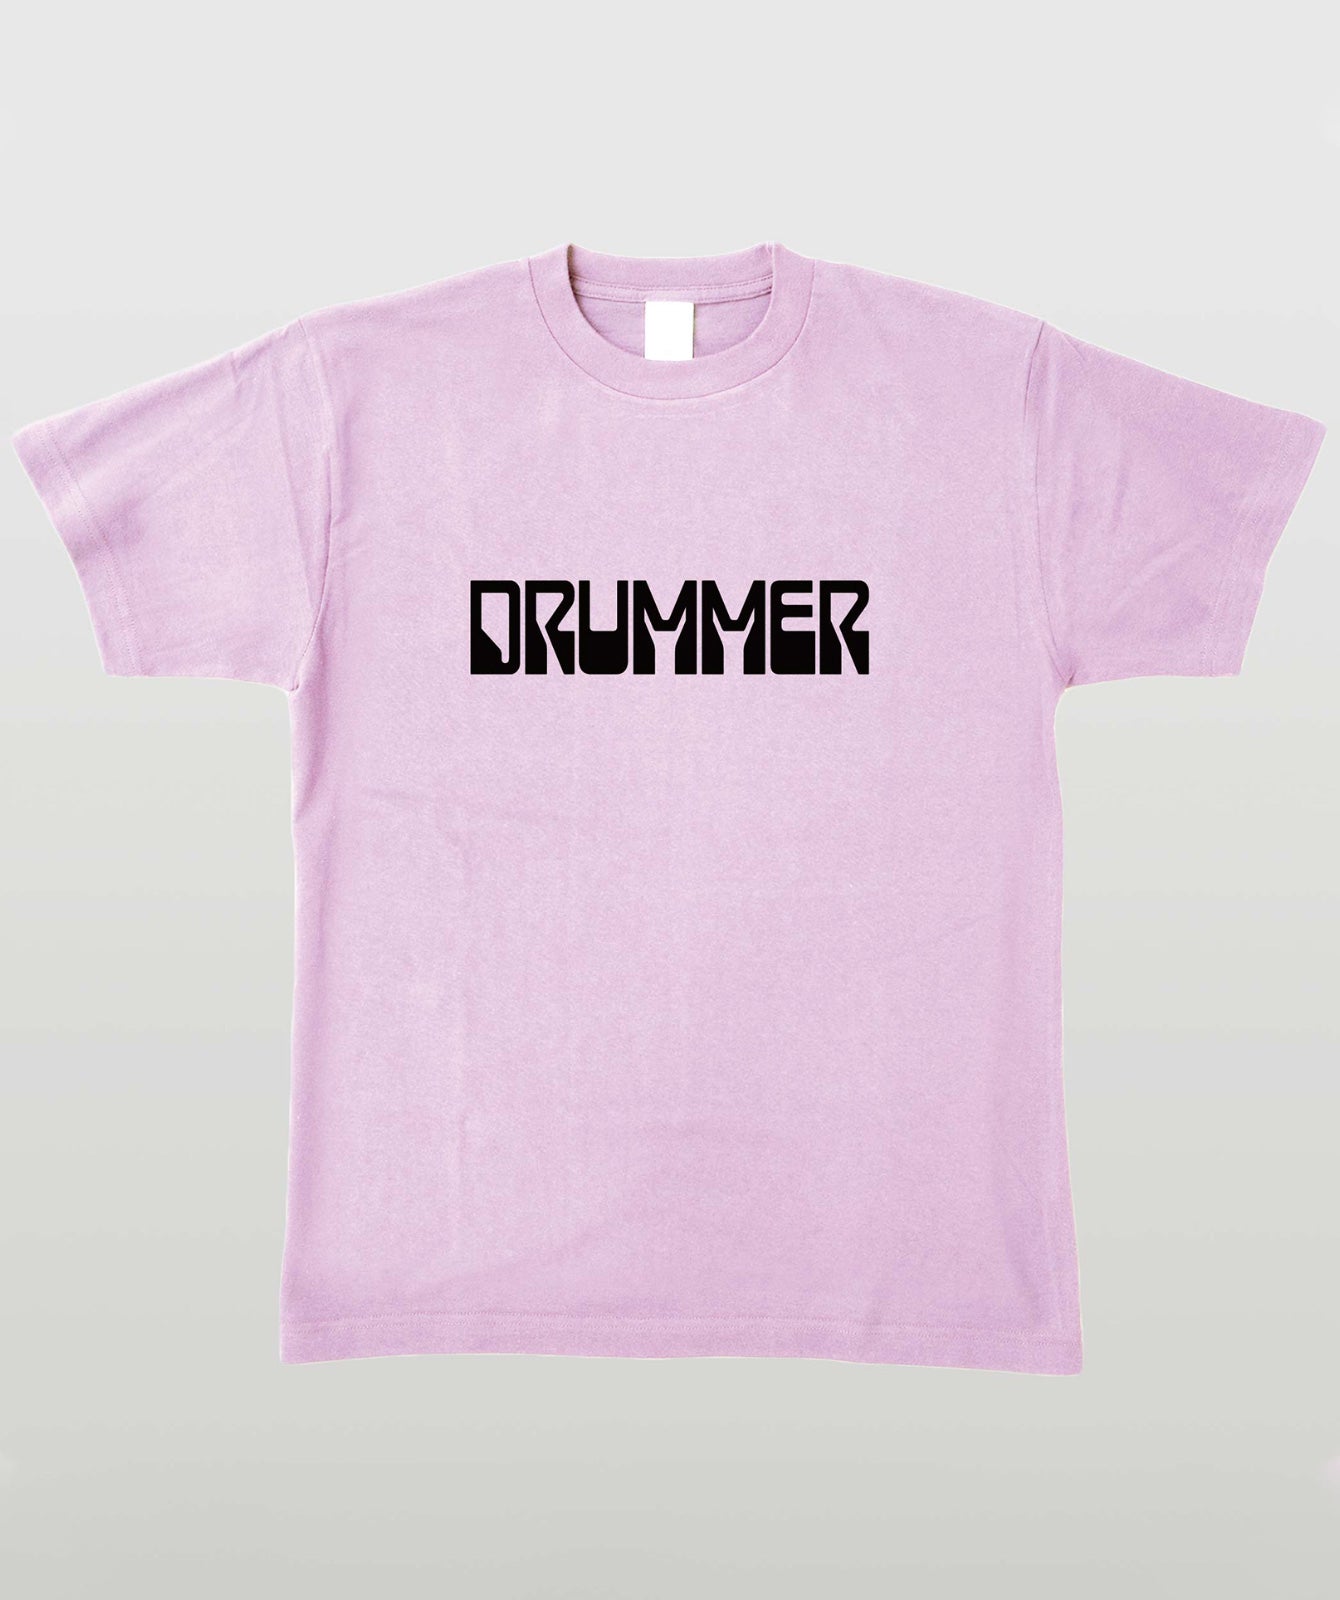 MS PLAYER SERIES ～DRUMMER Type F～